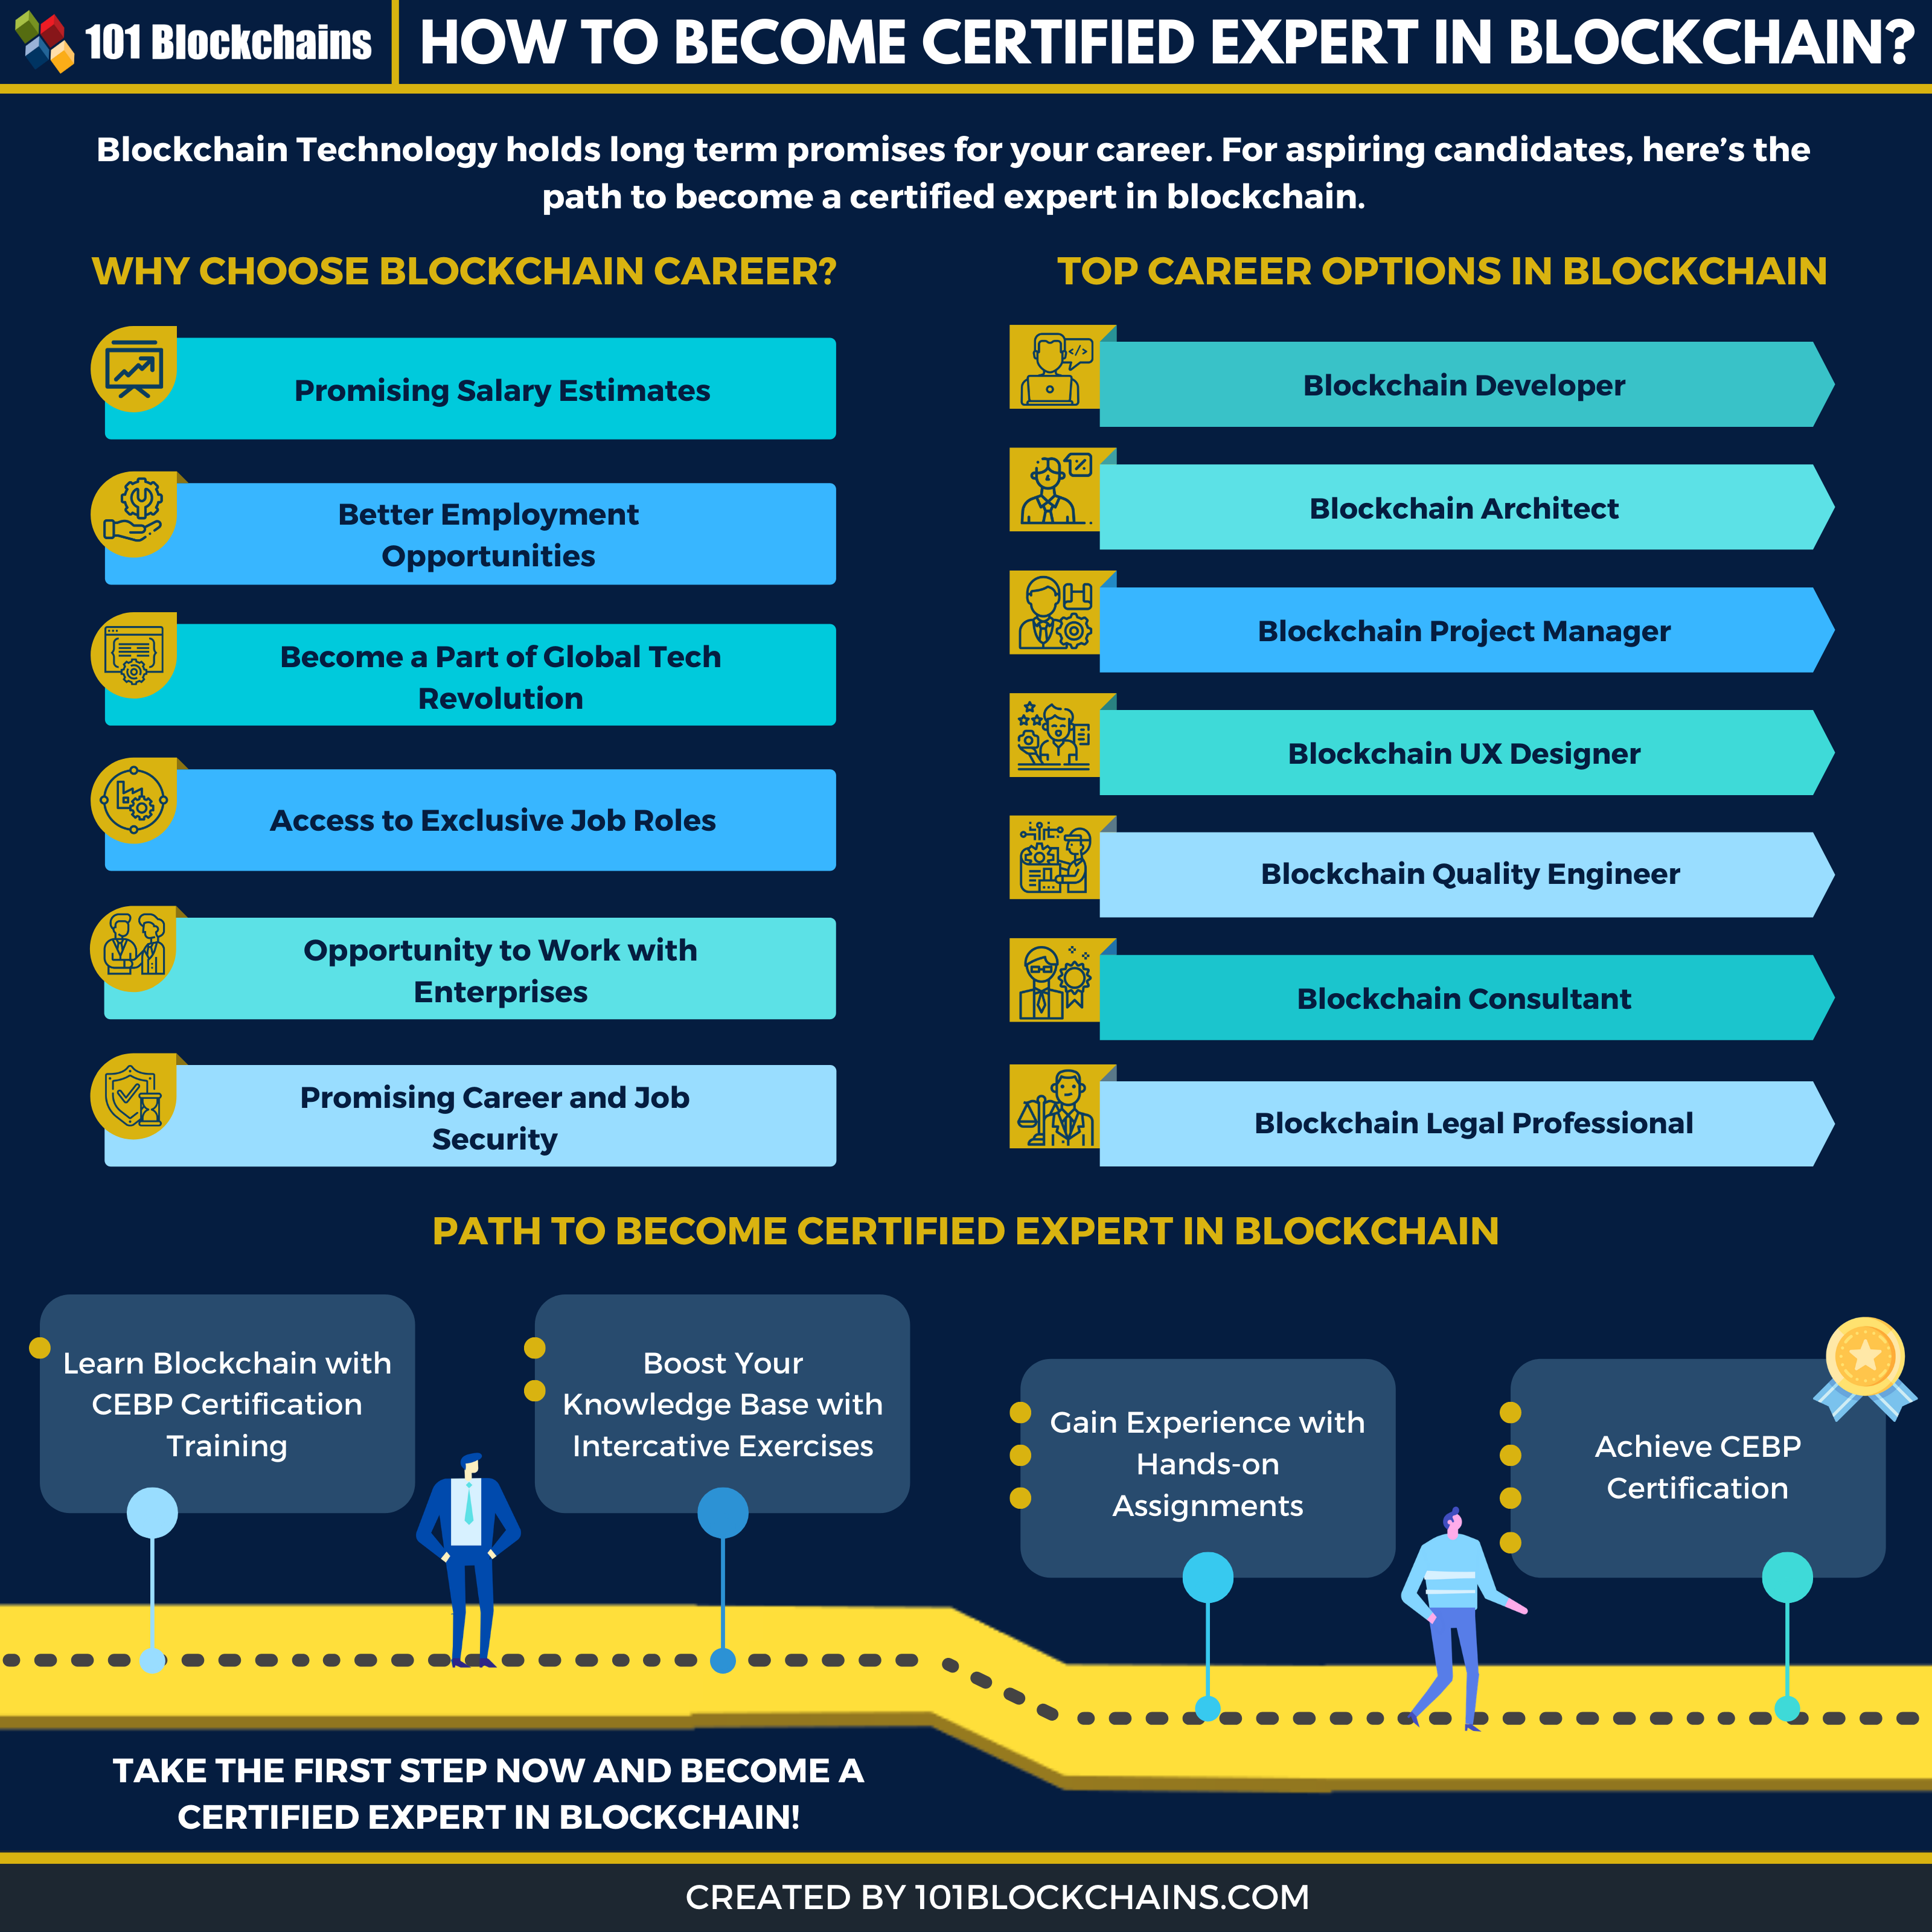 How to Become Certified Expert in Blockchain?